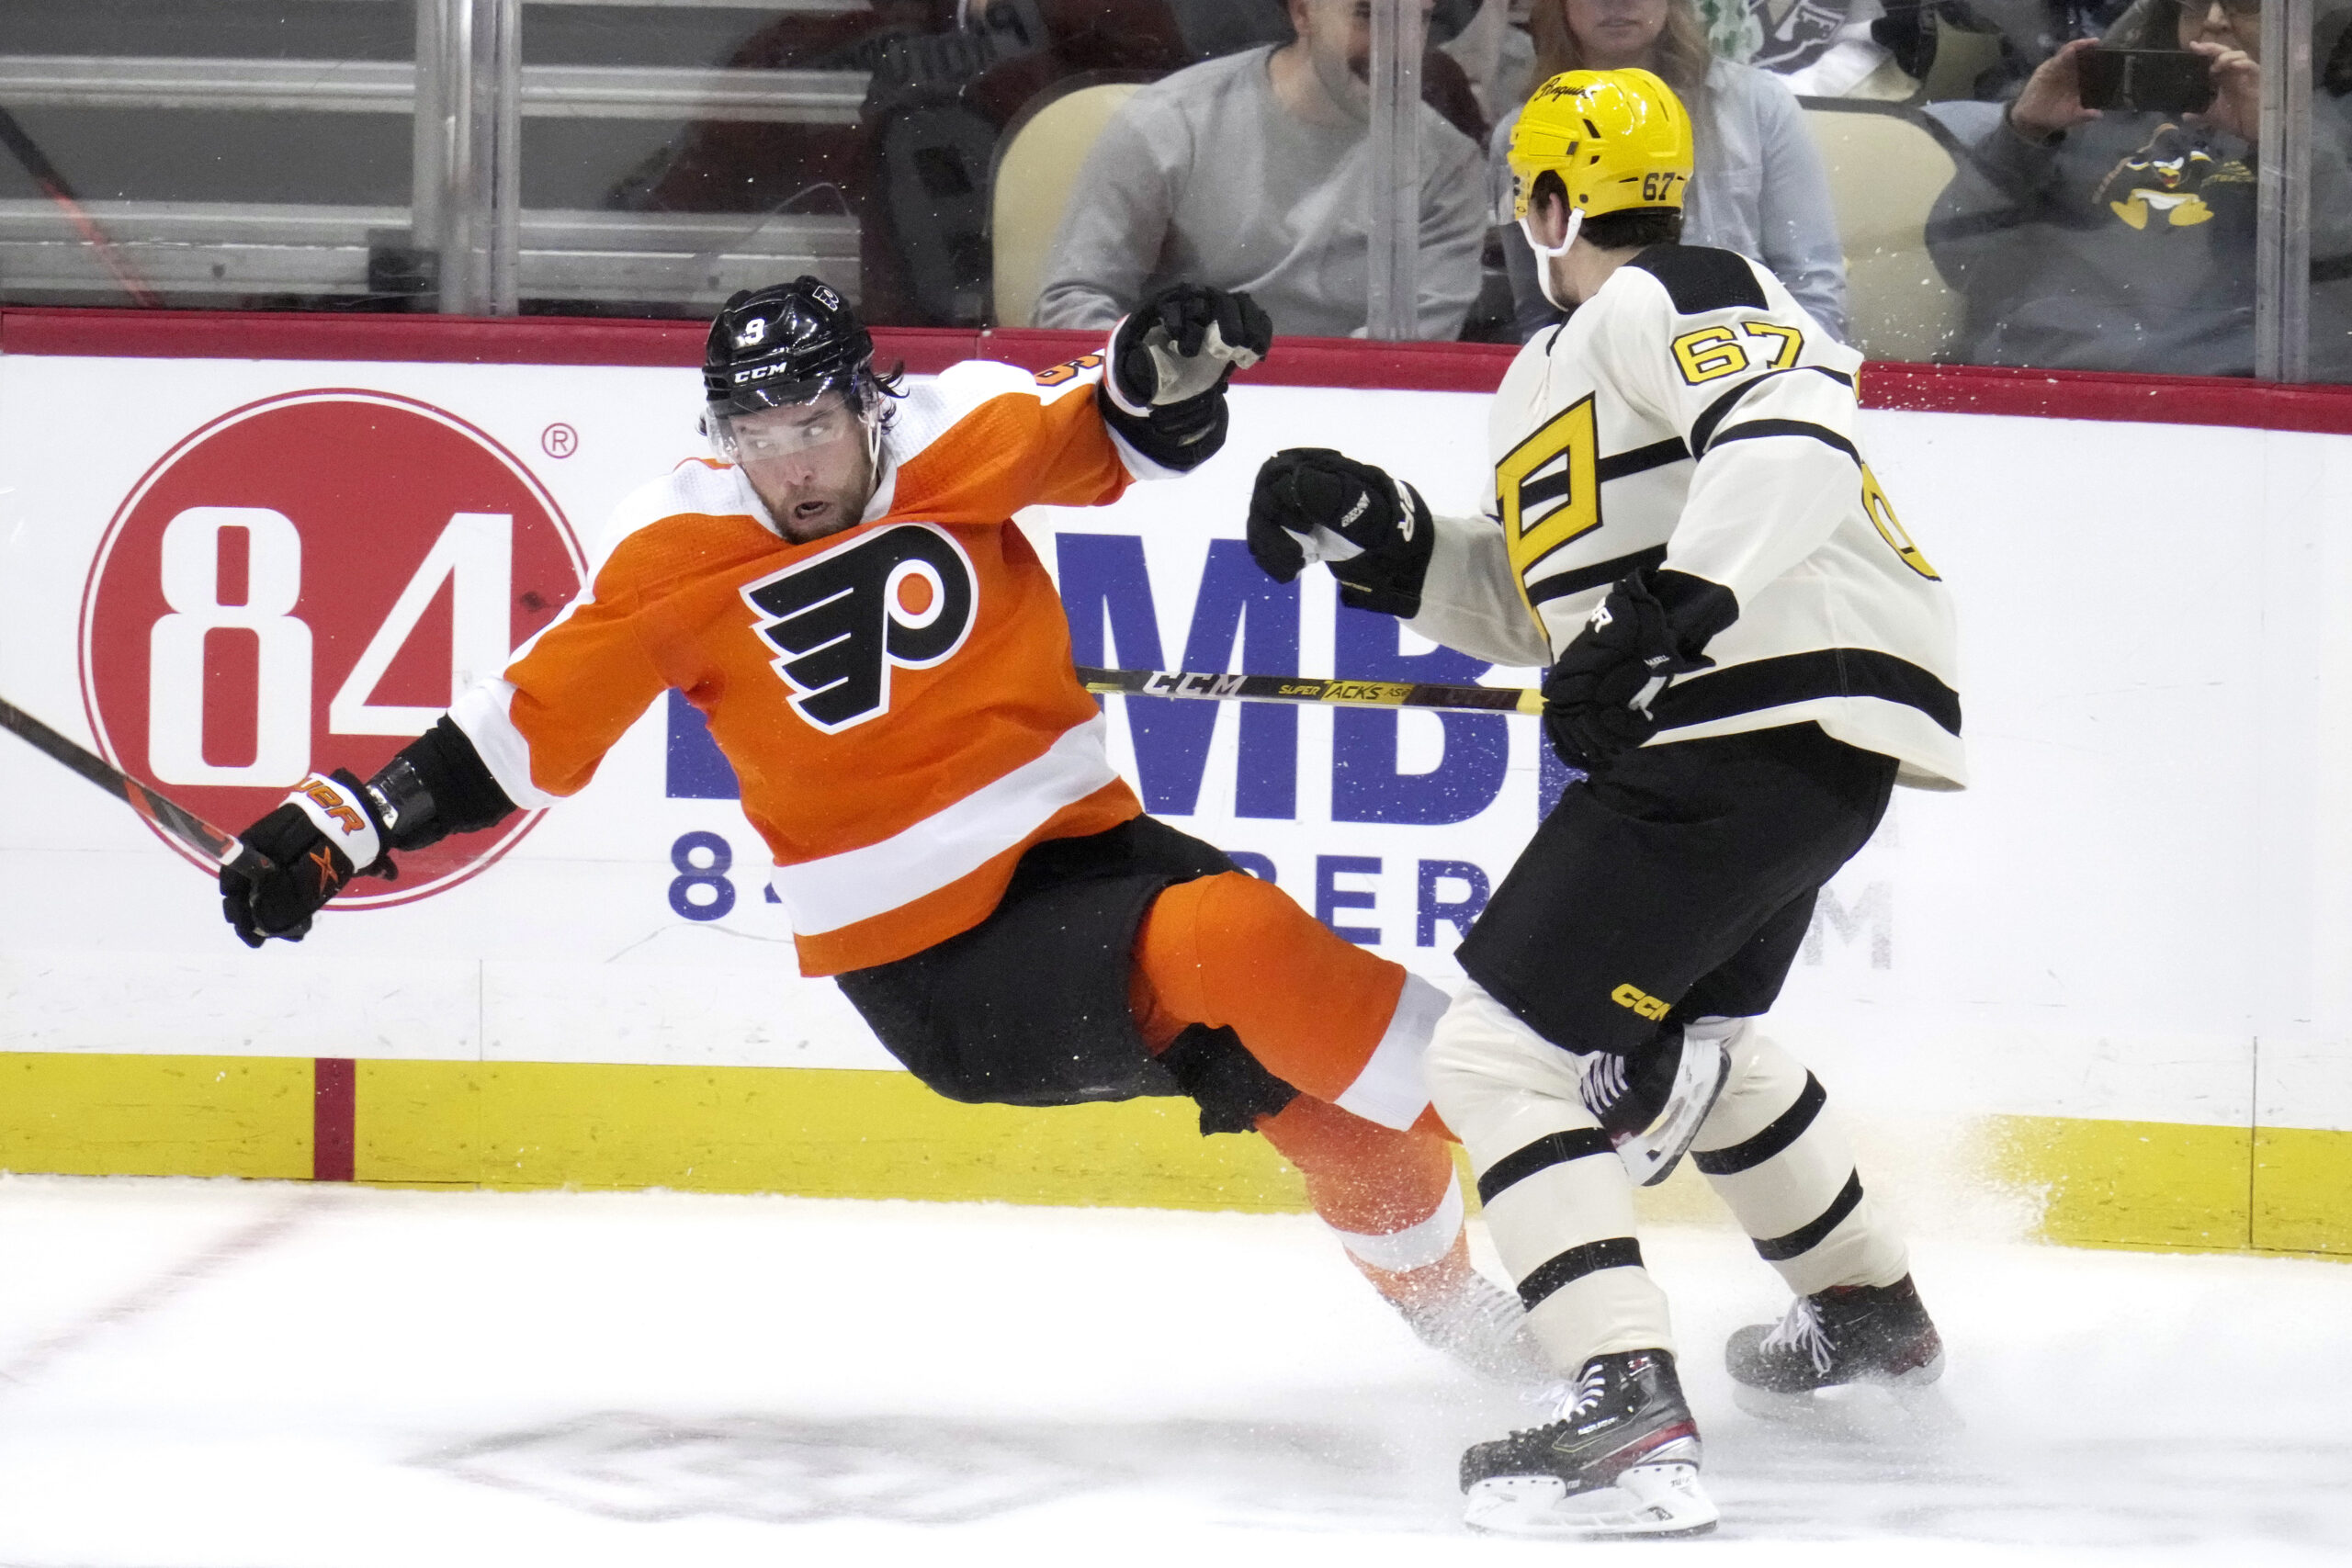 Flyers' coach John Tortorella claims Ivan Provorov 'did nothing